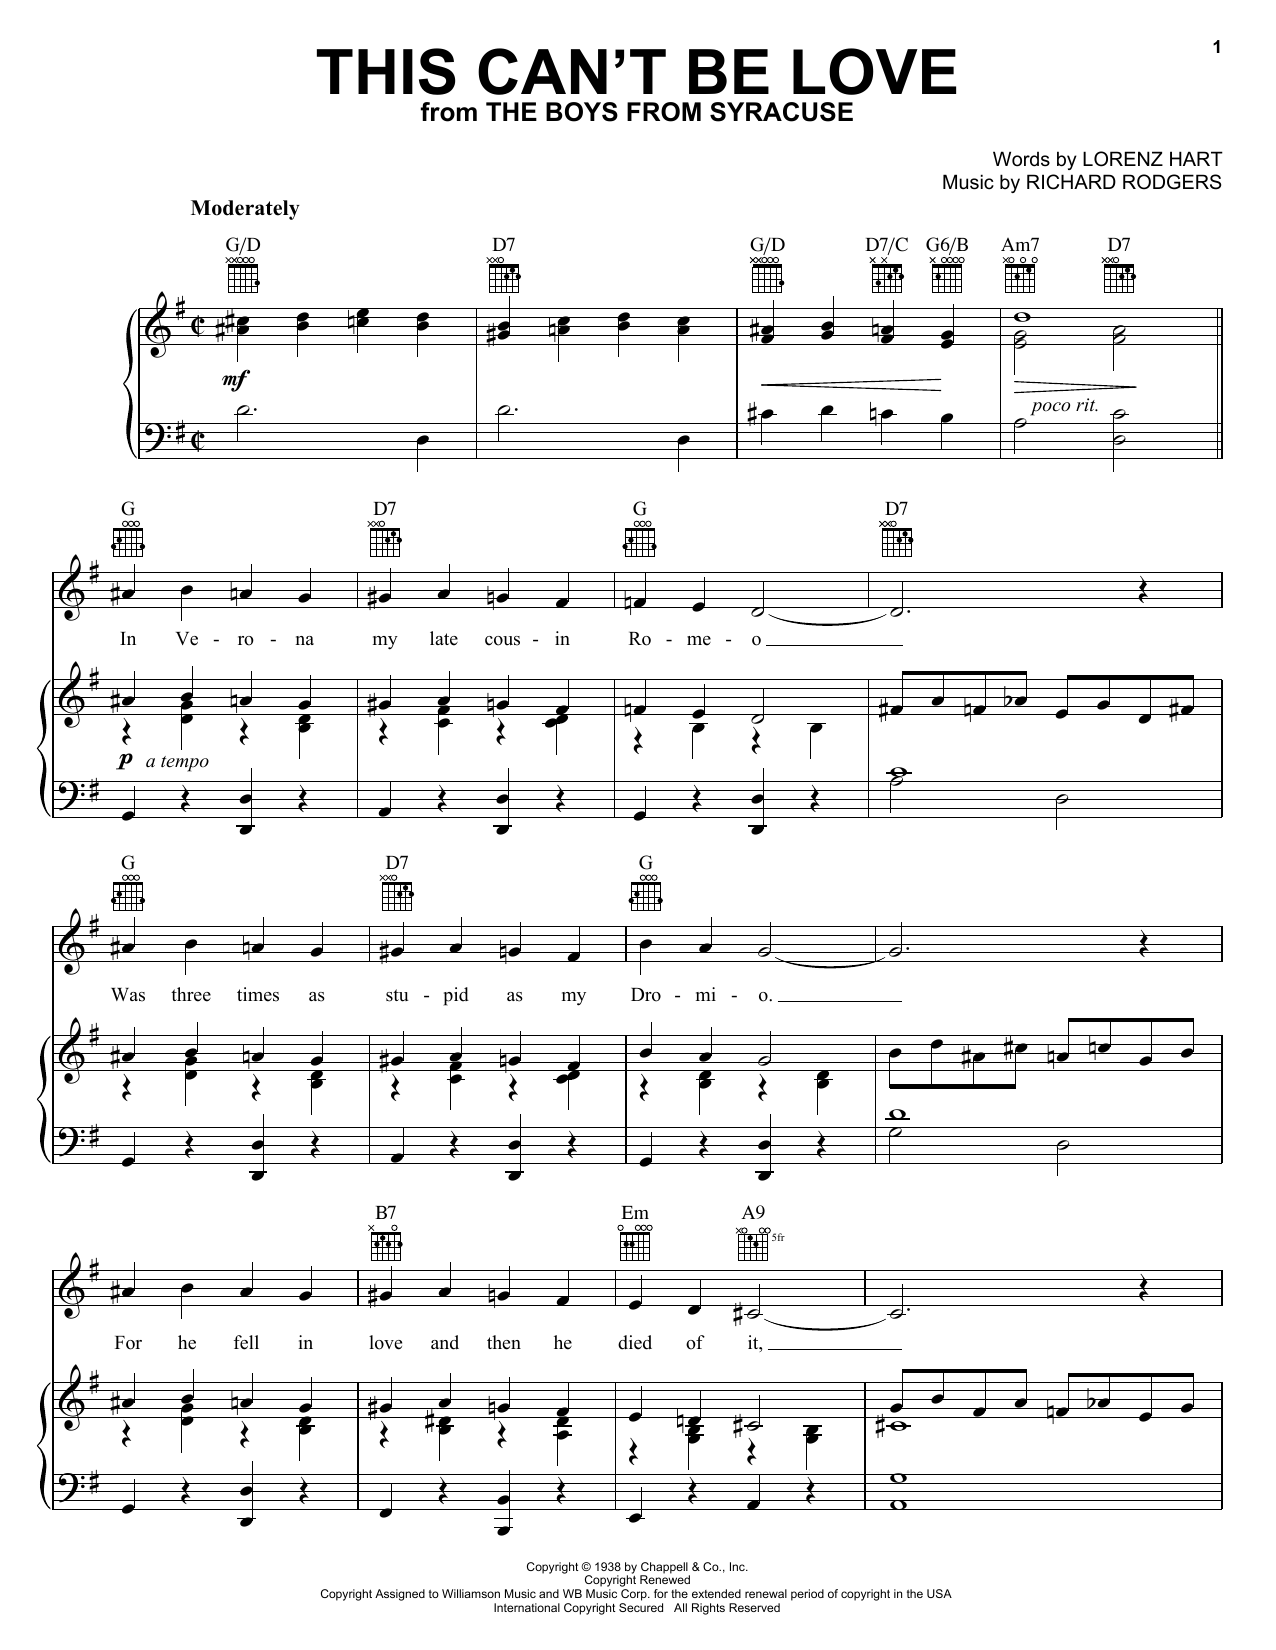 Diana Krall This Can't Be Love sheet music notes printable PDF score